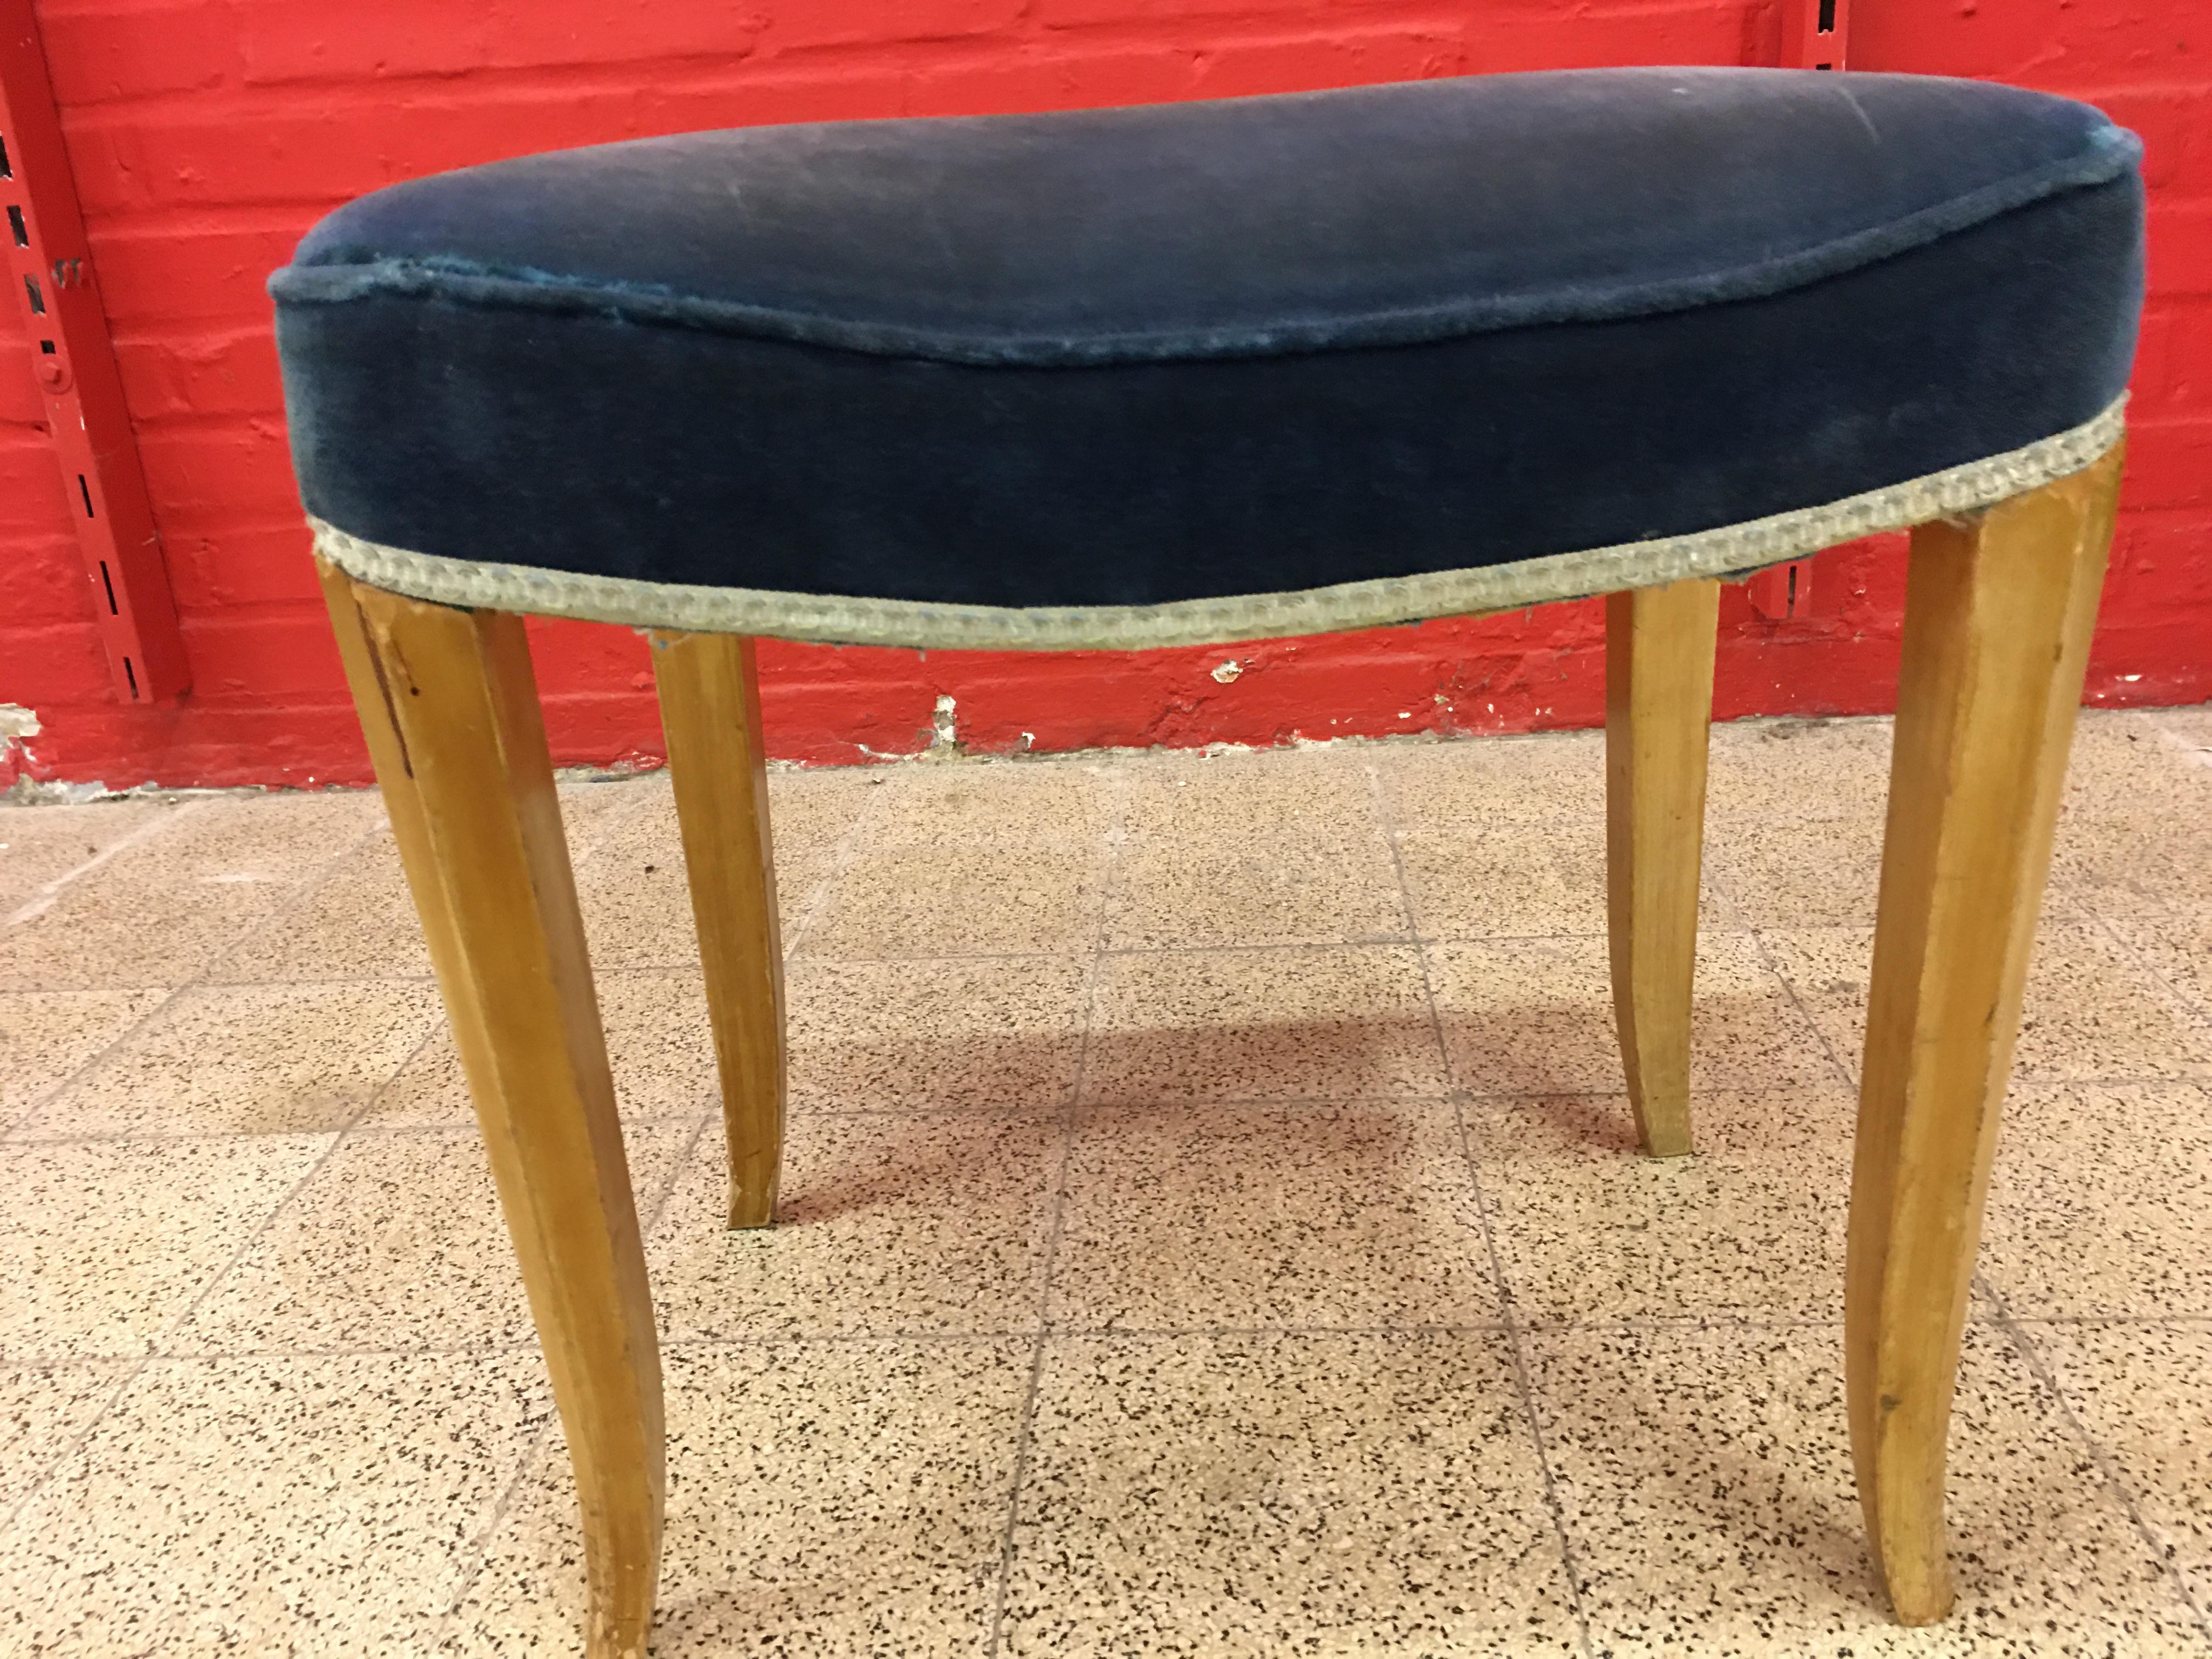 René Prou, 2 Art Deco Stools in Lacquered Wood and Blue Velvet, circa 1940-1950 For Sale 1